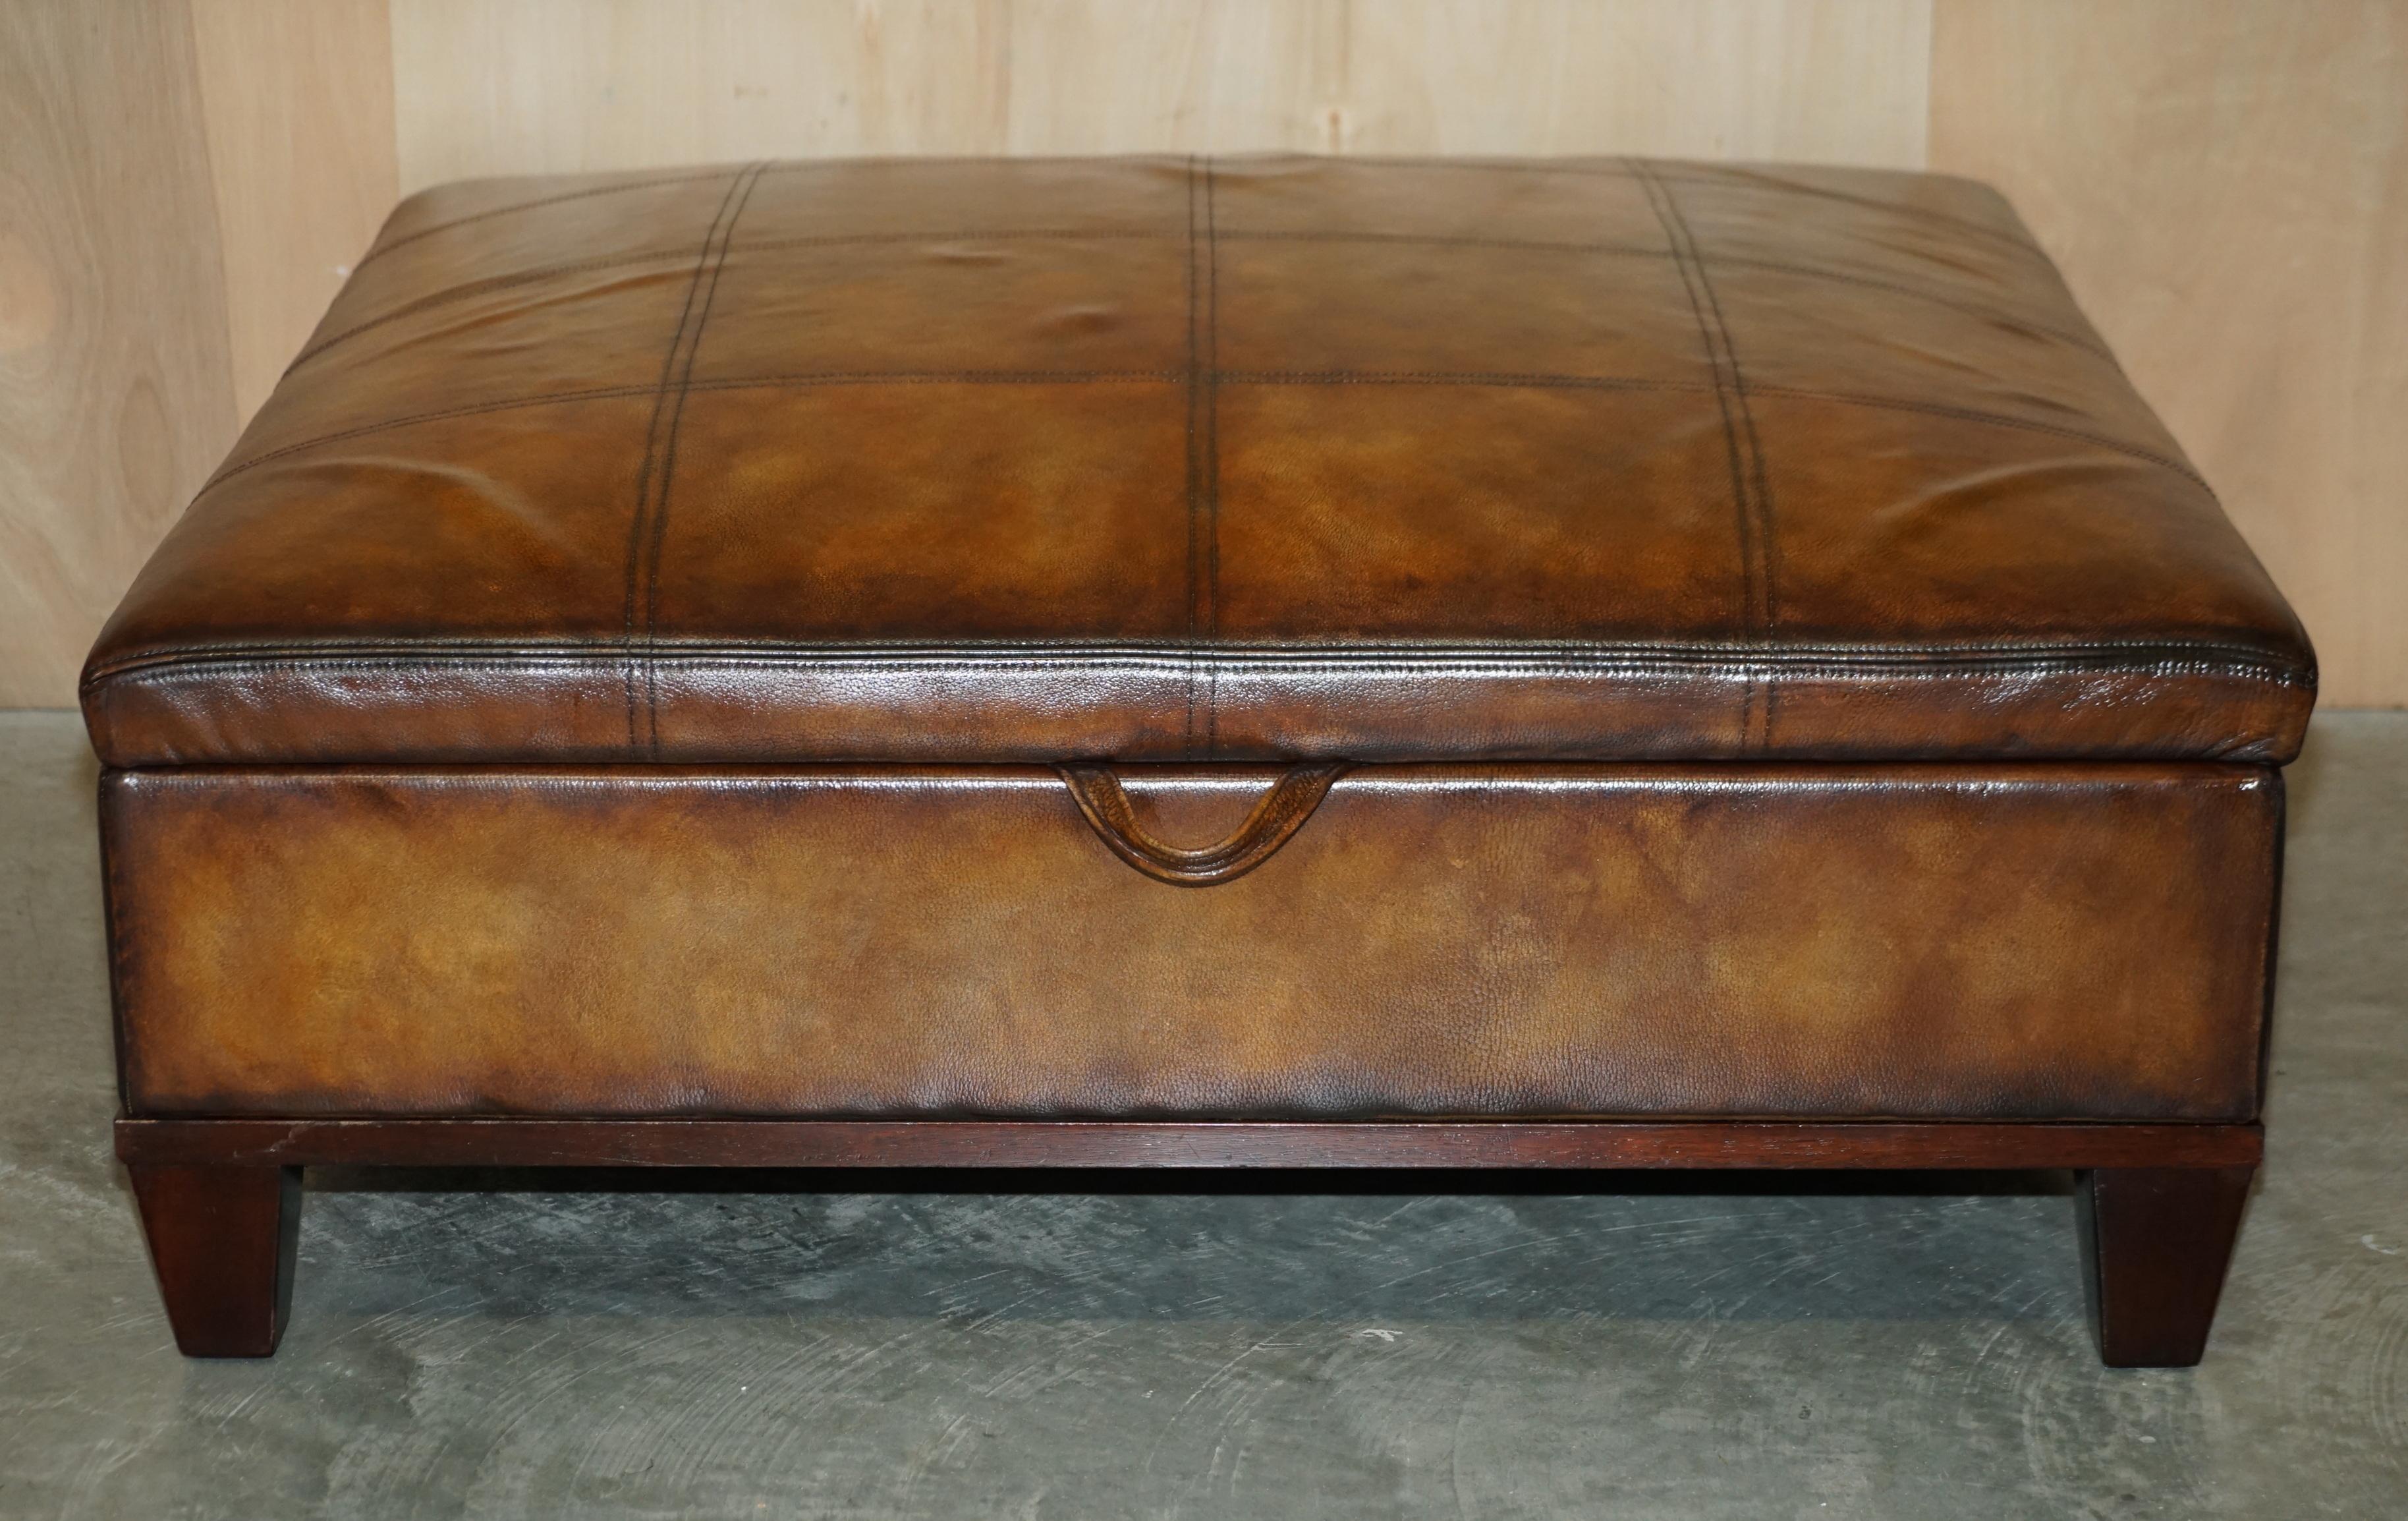 We are delighted to offer for sale this extra large fully restored hand made in Chelsea George Smith brown leather hearth ottoman footstool / coffee table with large amounts of internal storage.

A very good looking collectable and rare stool, I